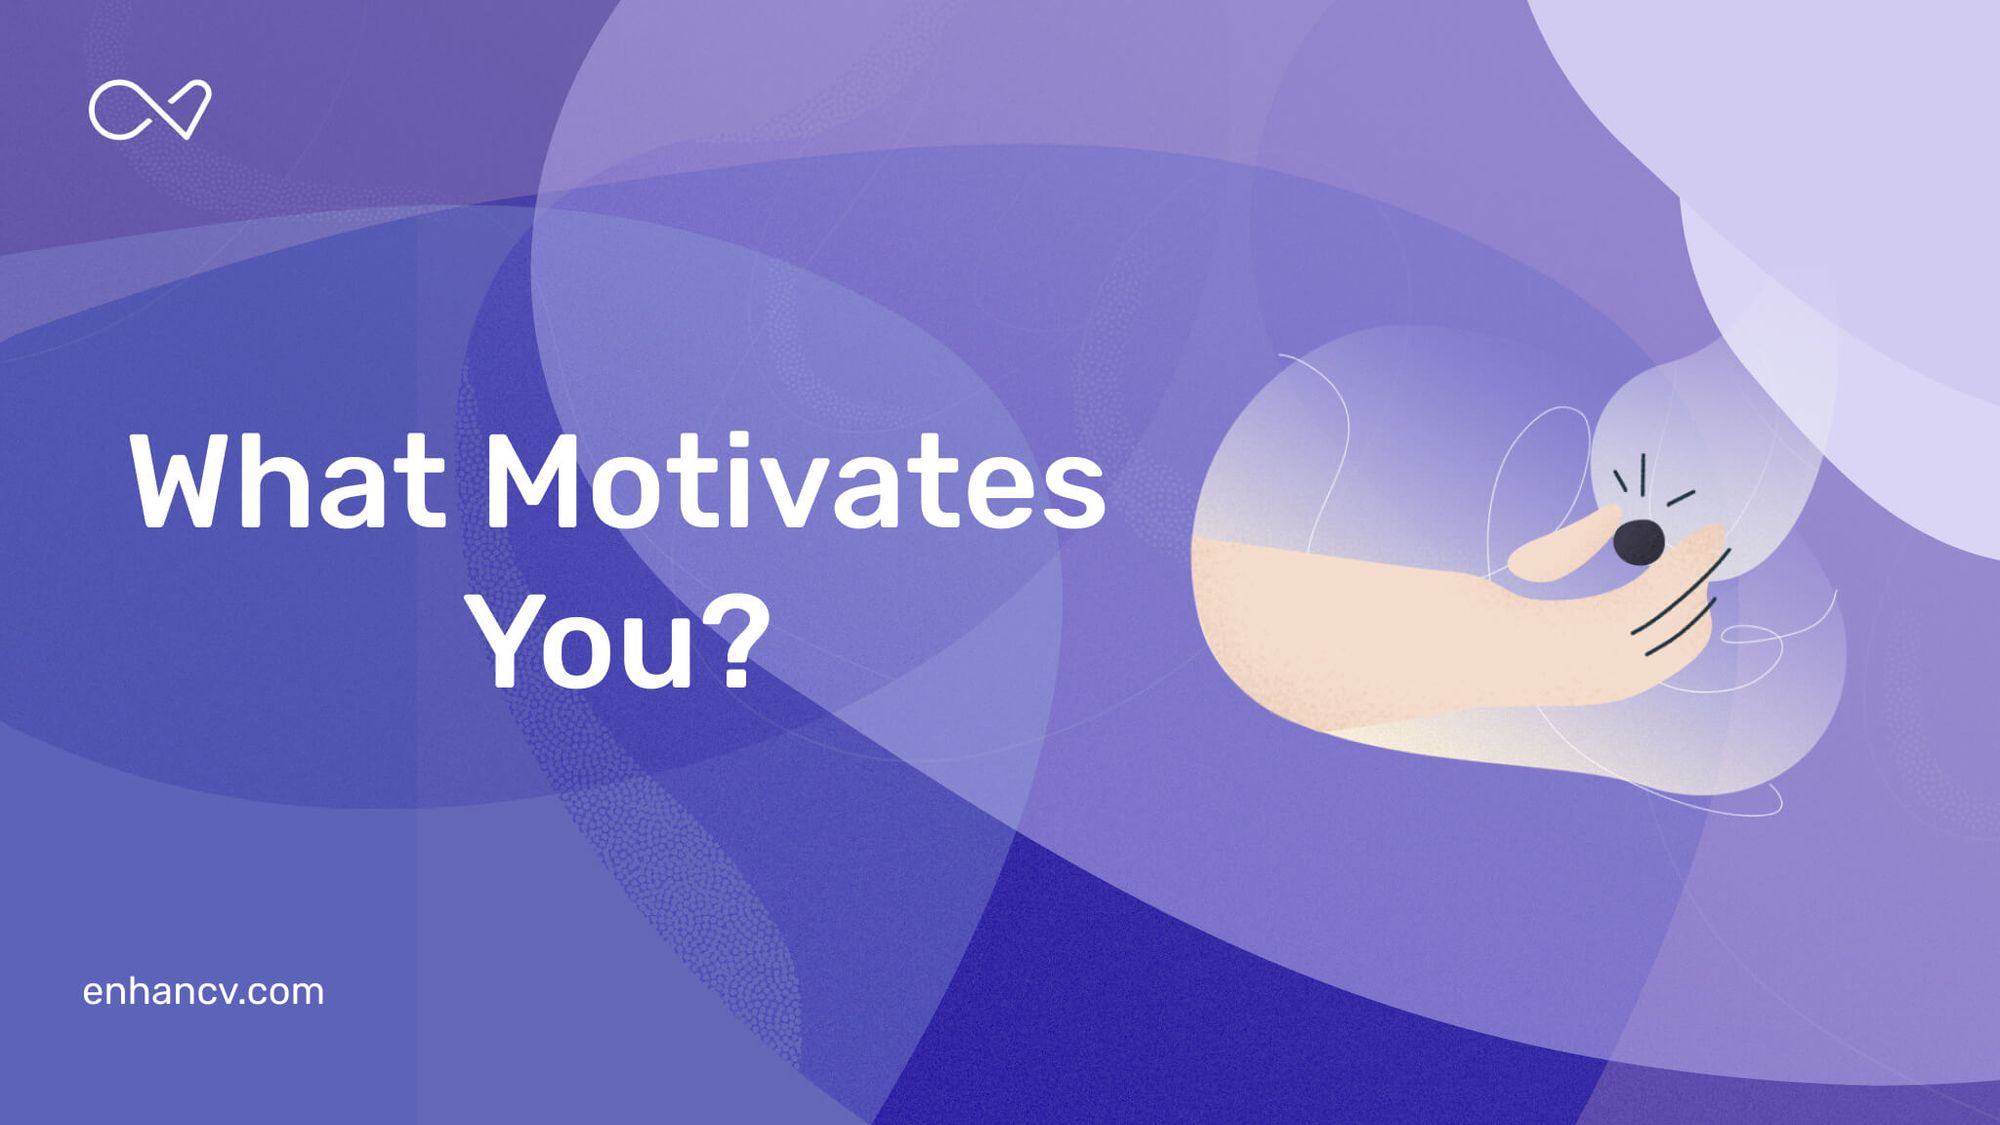 How to Answer "What Motivates You?" Interview Question (With Examples)